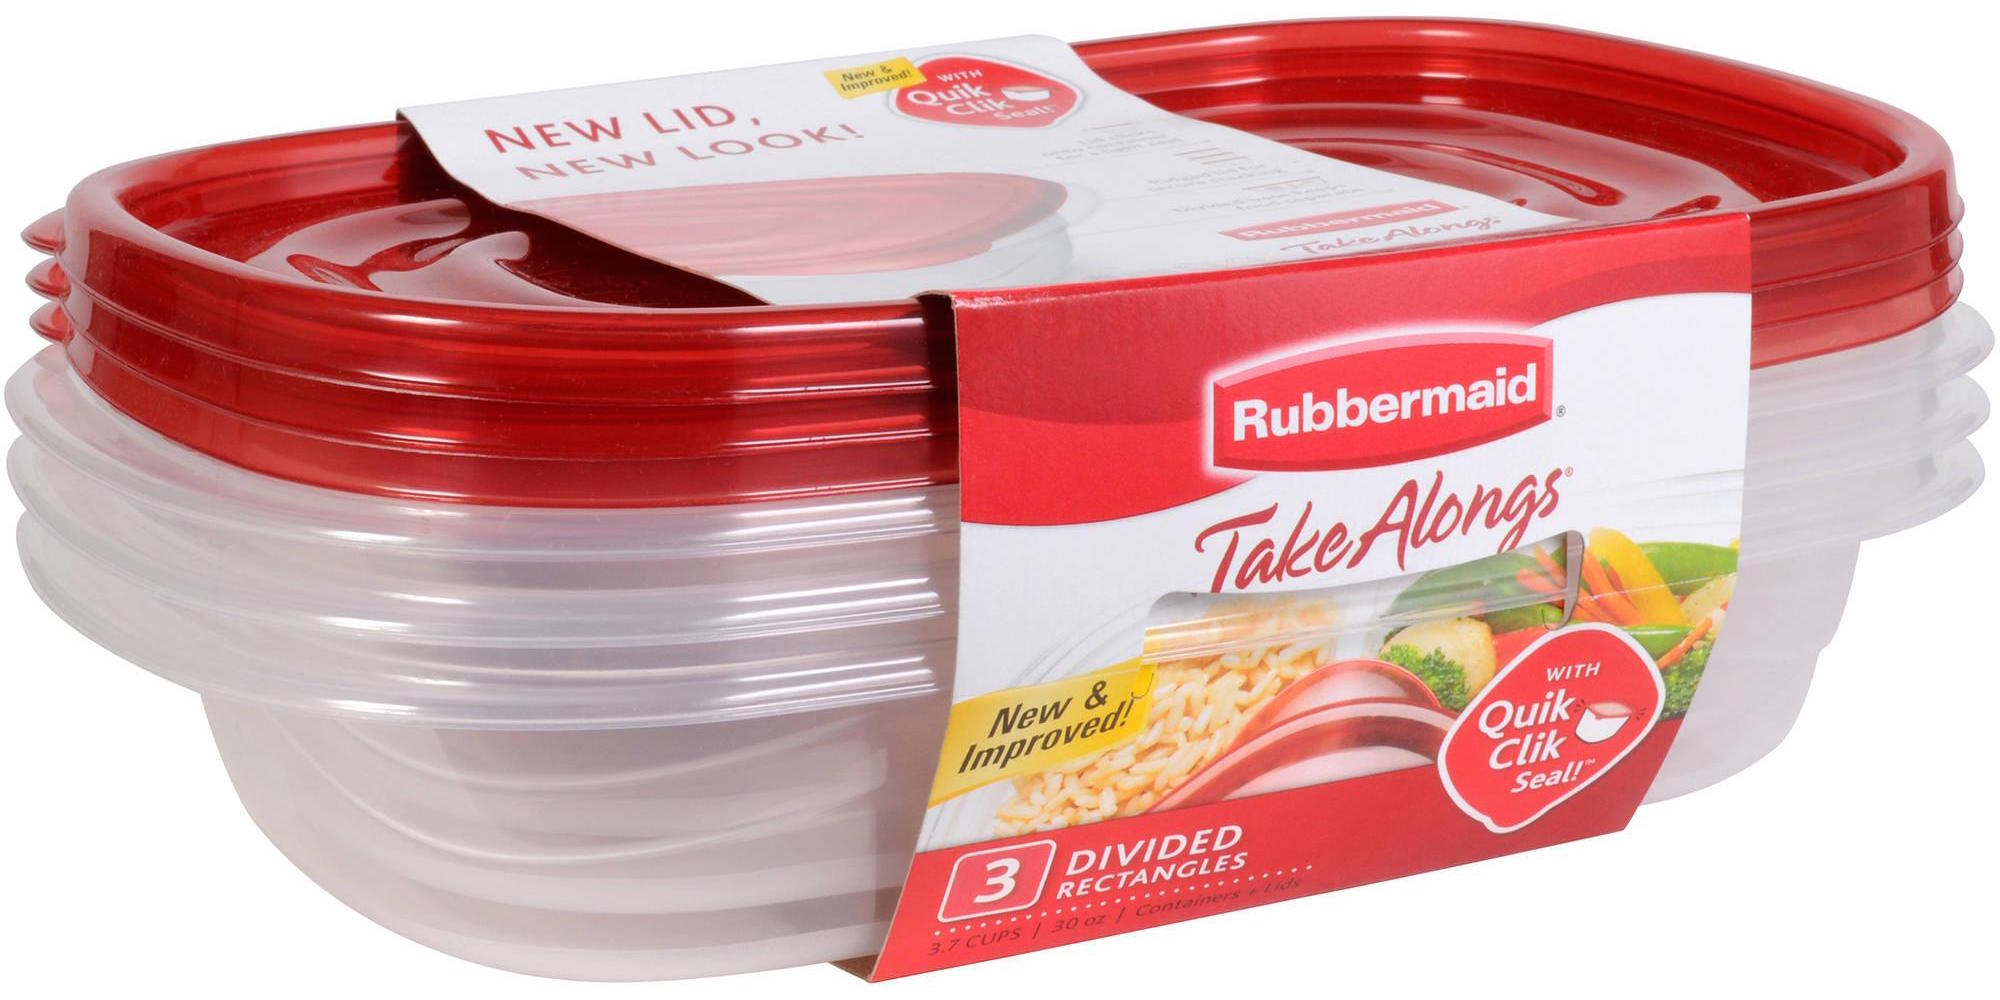 https://9to5toys.com/wp-content/uploads/sites/5/2016/02/rubbermaid-take-alongs-food-storage-container-divided-dishes-clear-set-of-3-sale-01.jpg